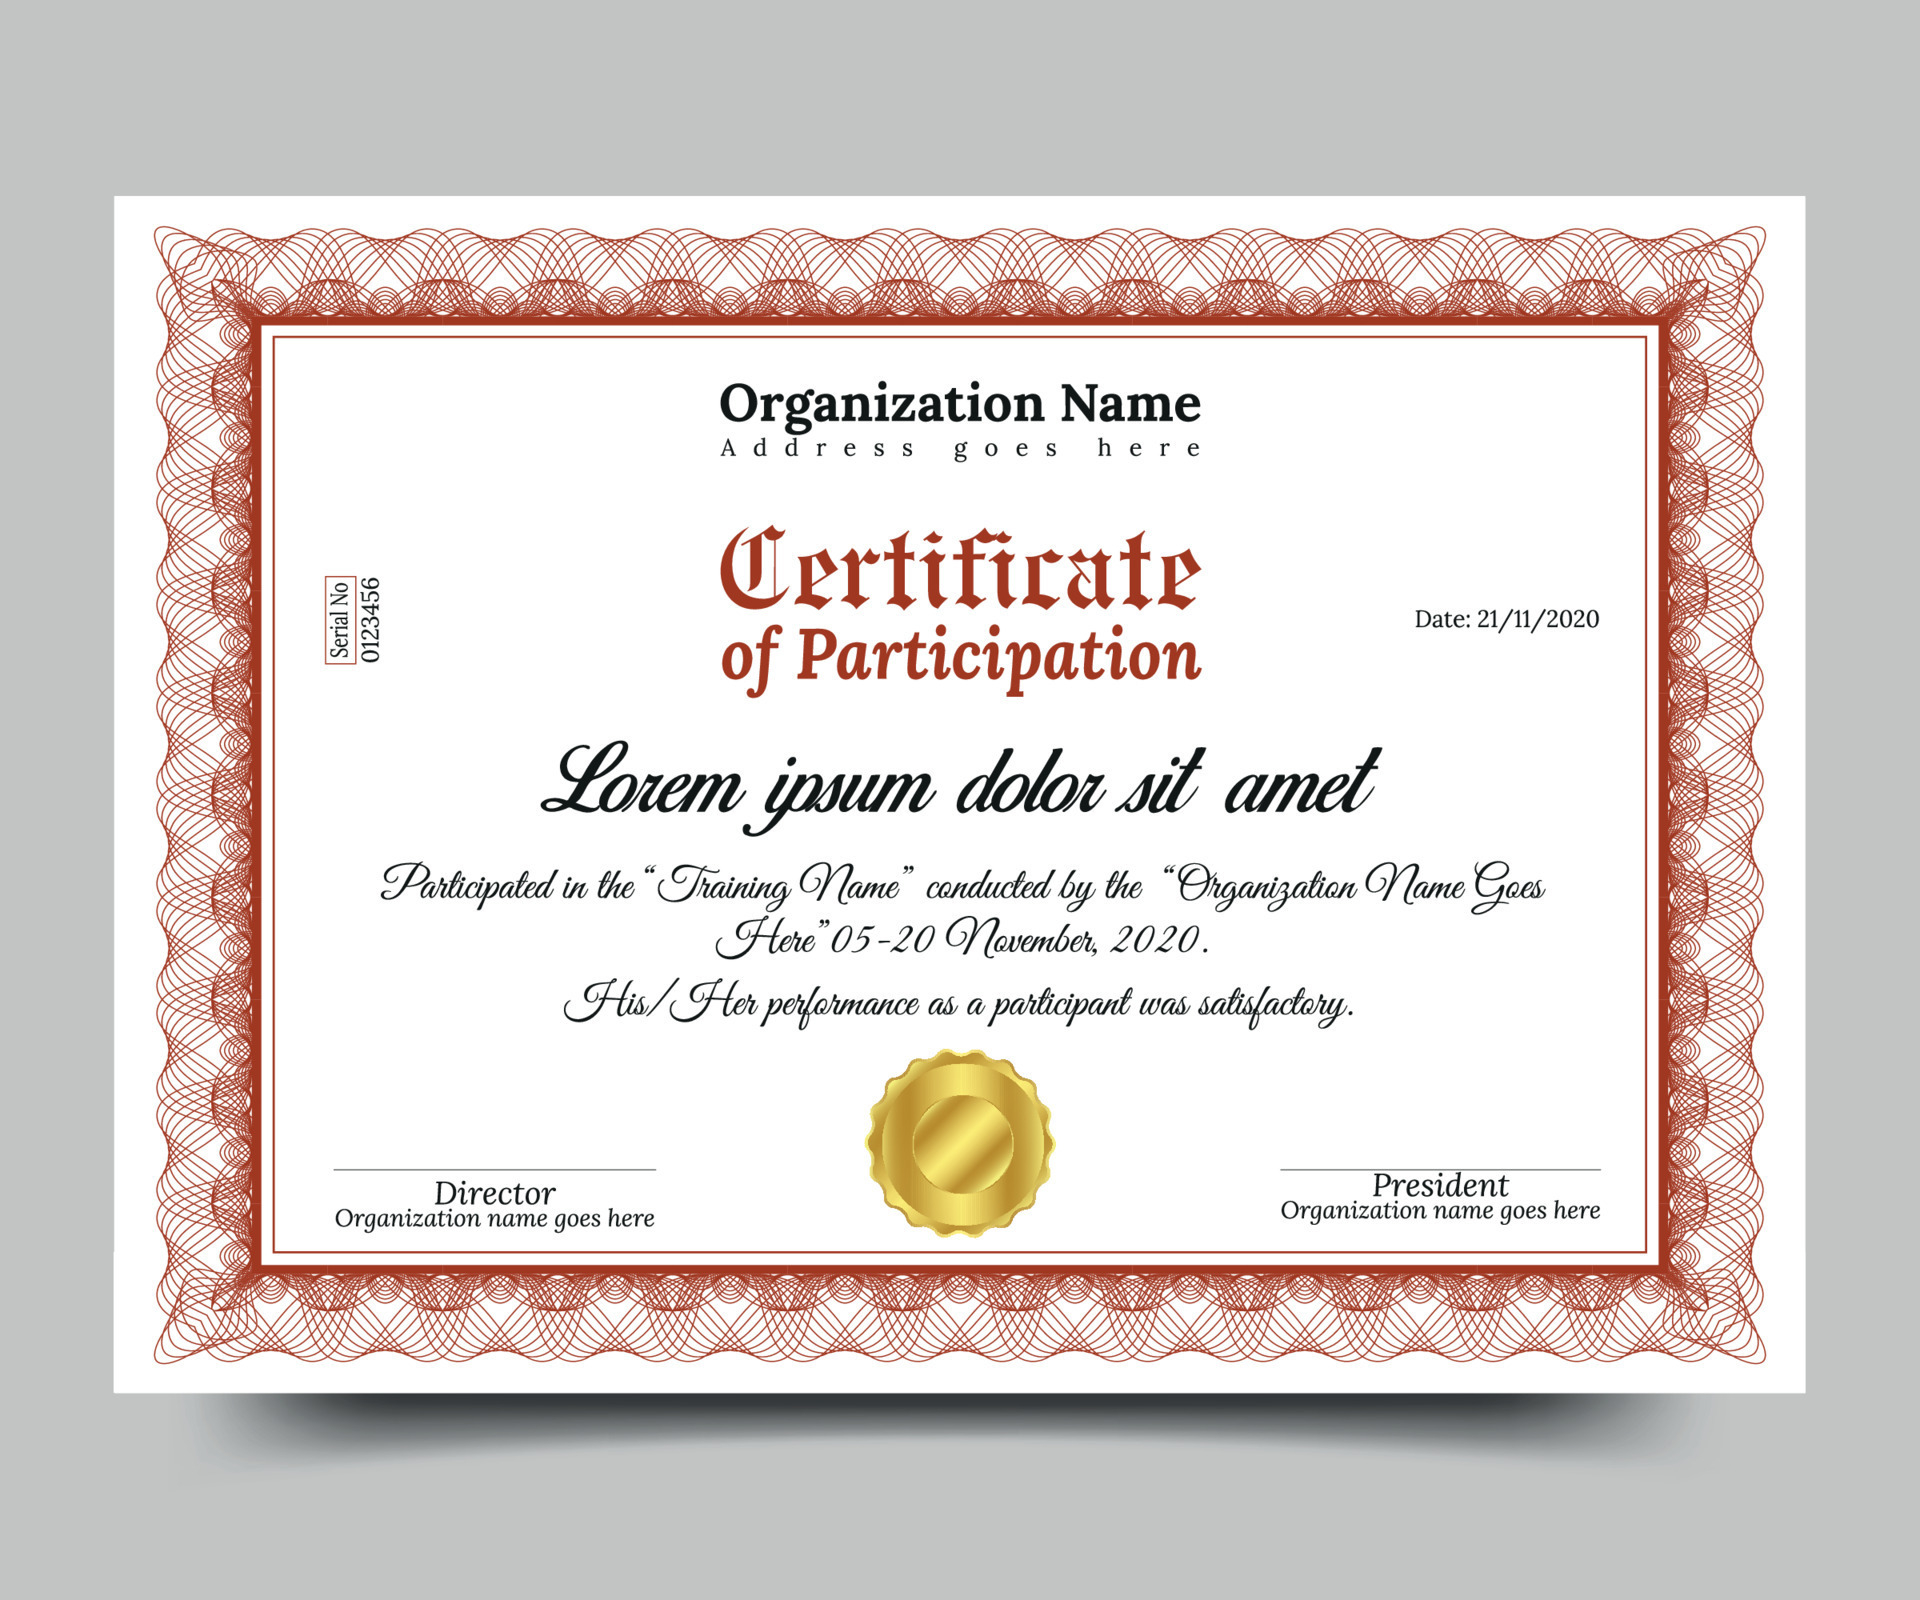 Certificate Of Participation Template Free Vector 10 Vector  Intended For Free Templates For Certificates Of Participation